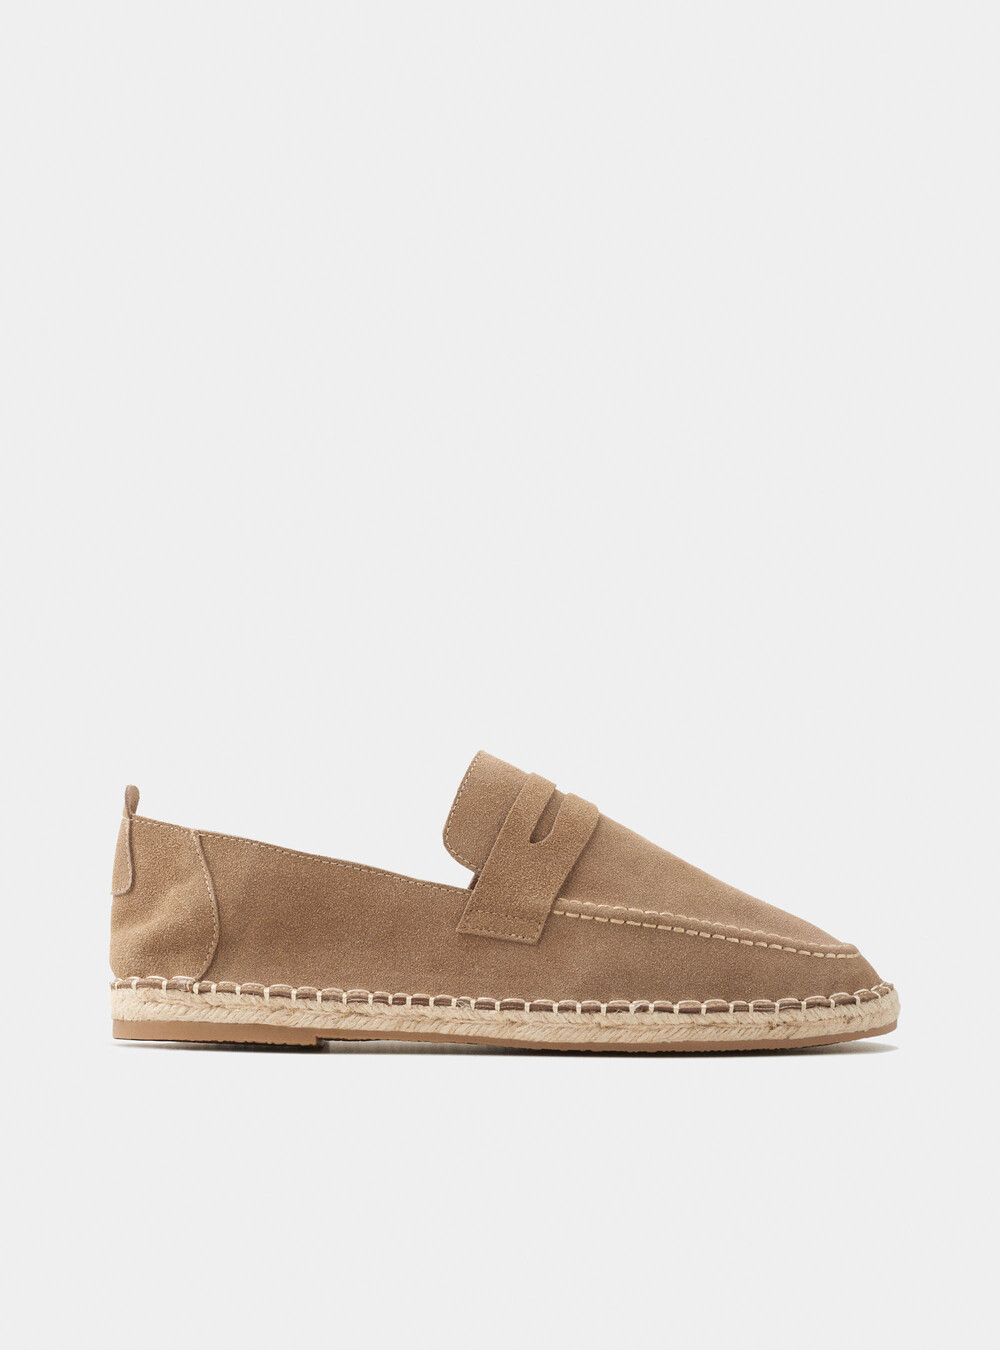 Espadrille style moccasin